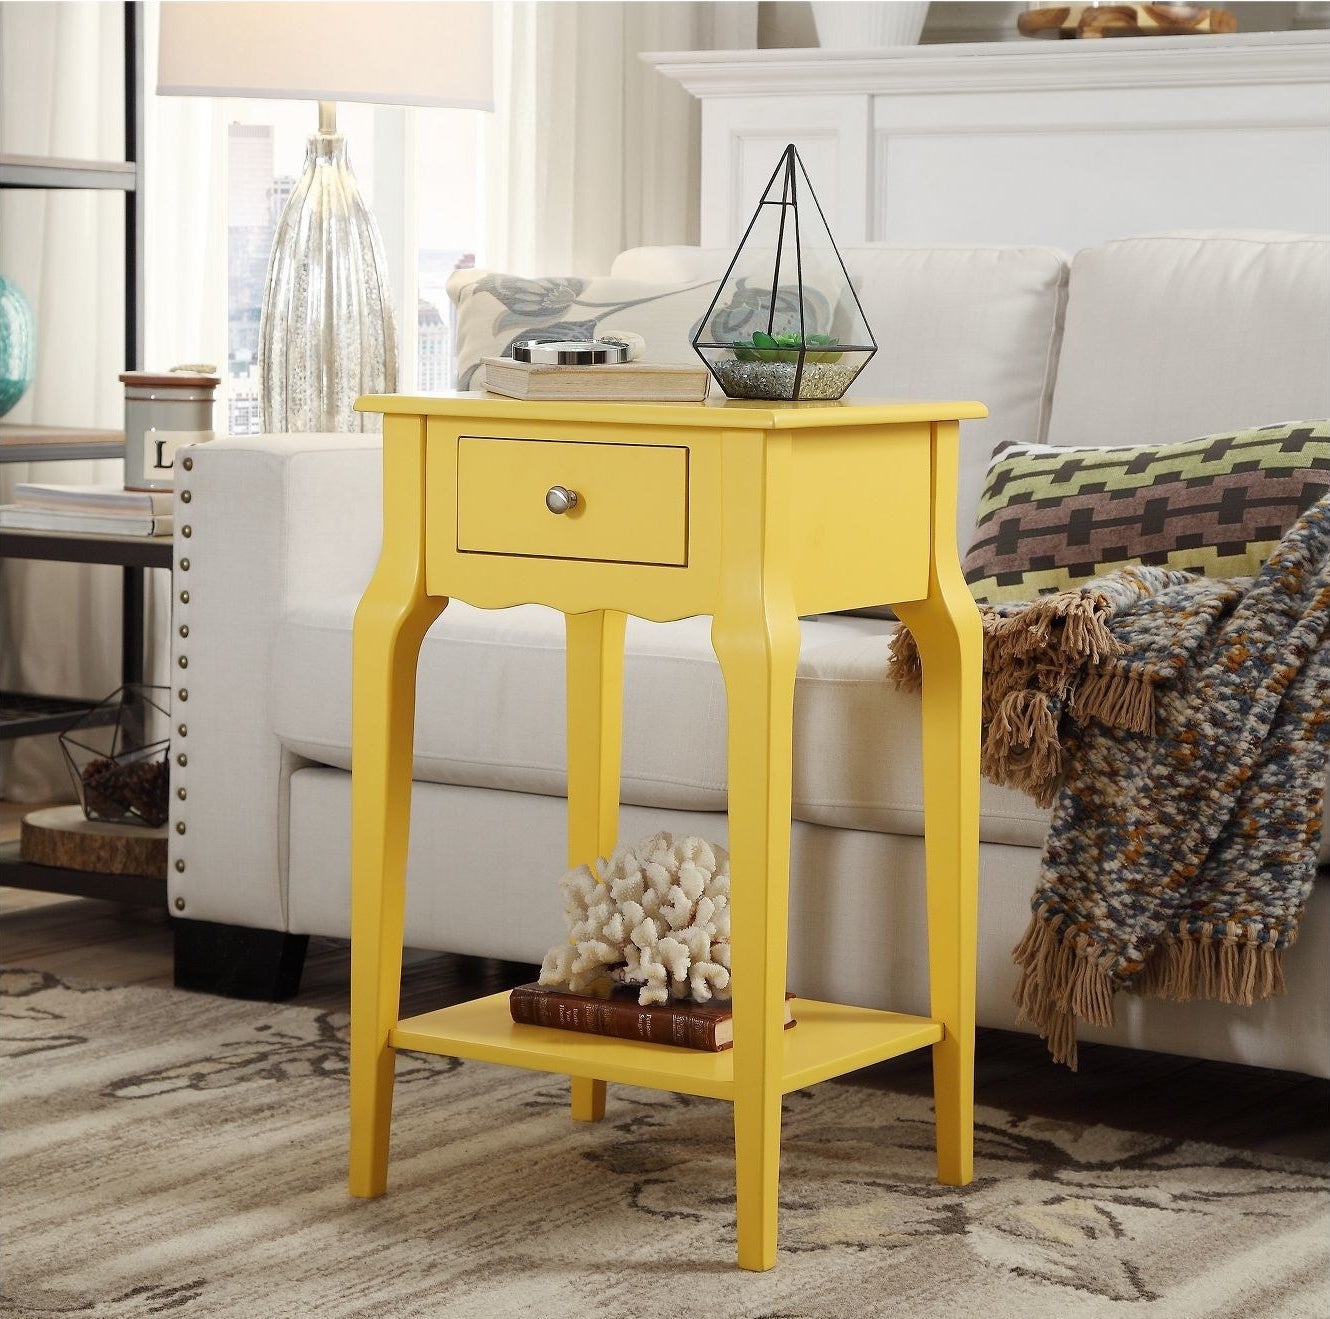 A yellow table in a home